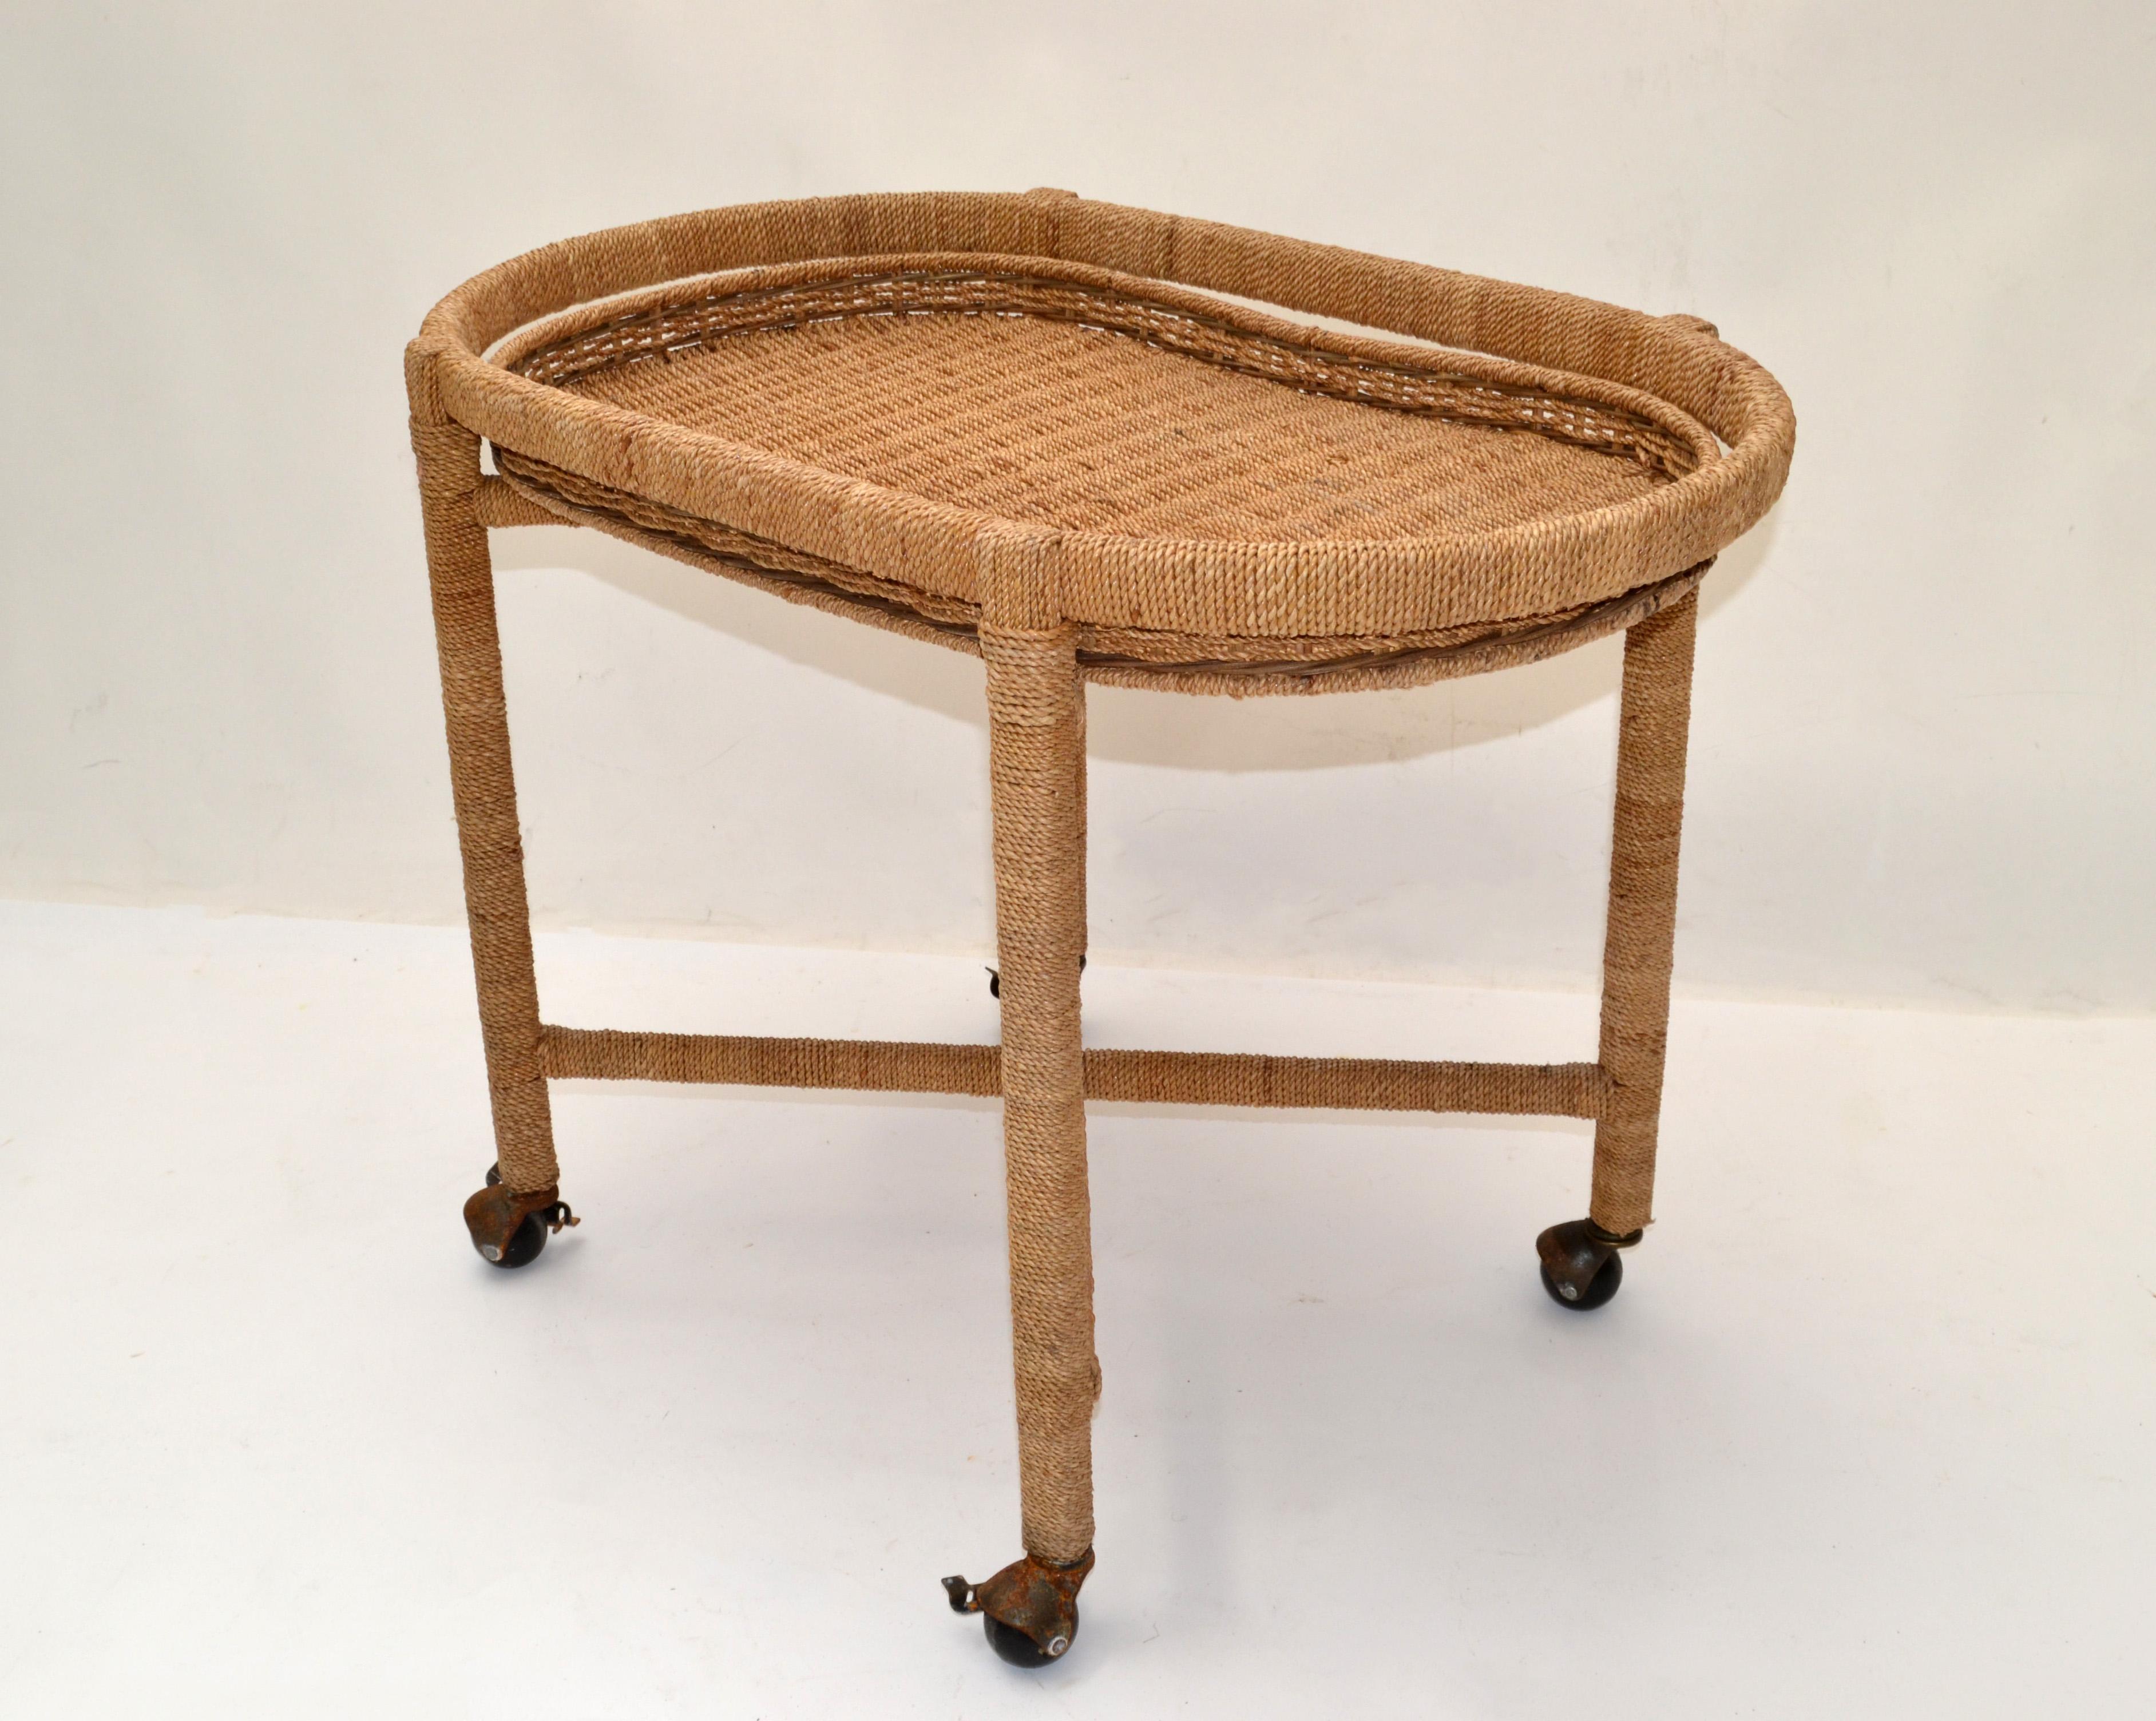 Vintage Mario Lopez Torres Style Rope Wicker Rattan Serving, Bar Cart Tray Table In Good Condition For Sale In Miami, FL